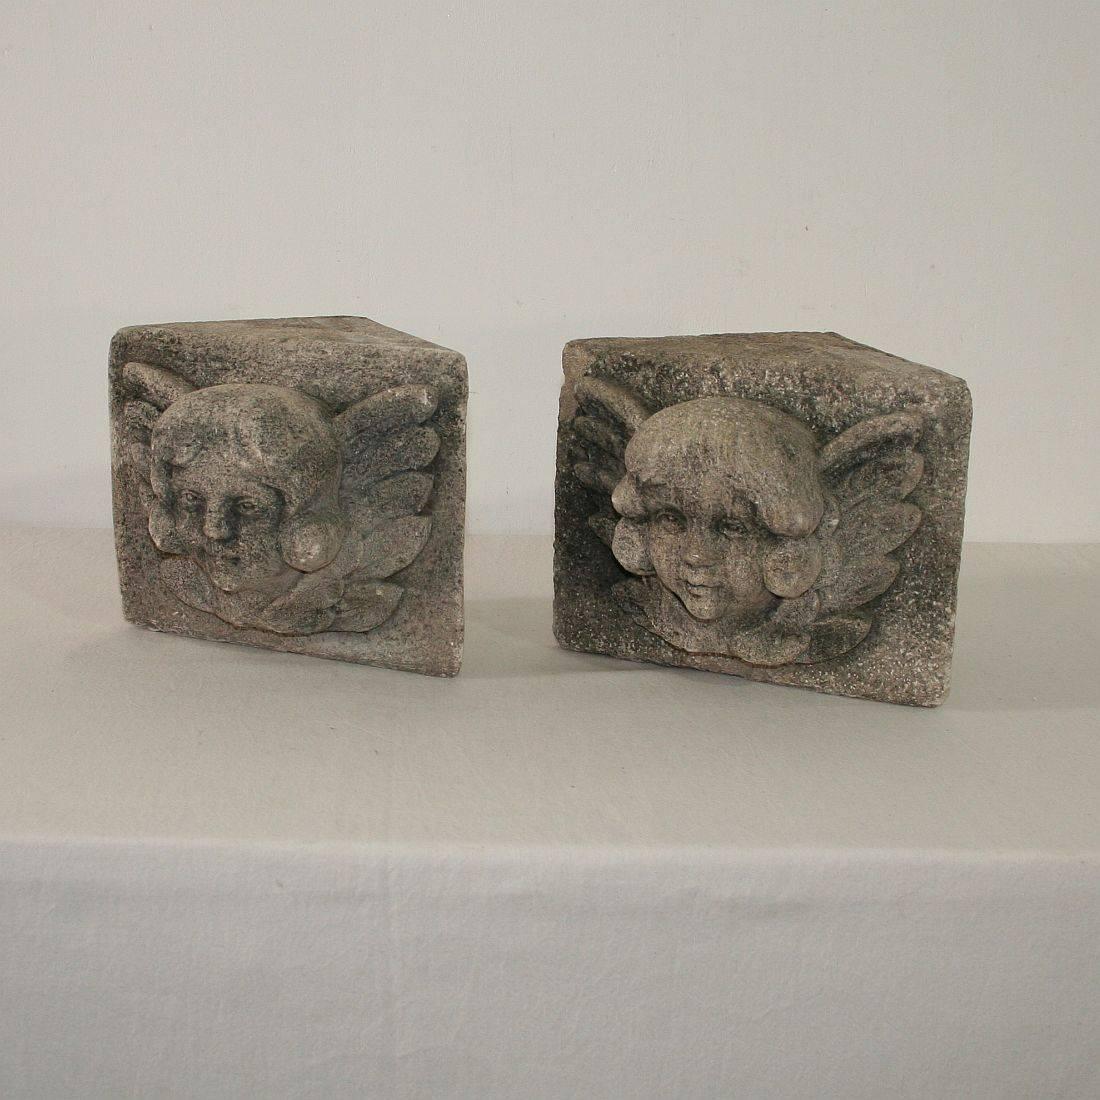 Beautiful pair of hand-carved stone winged angel head ornaments, France, circa 1800-1850. Weathered.